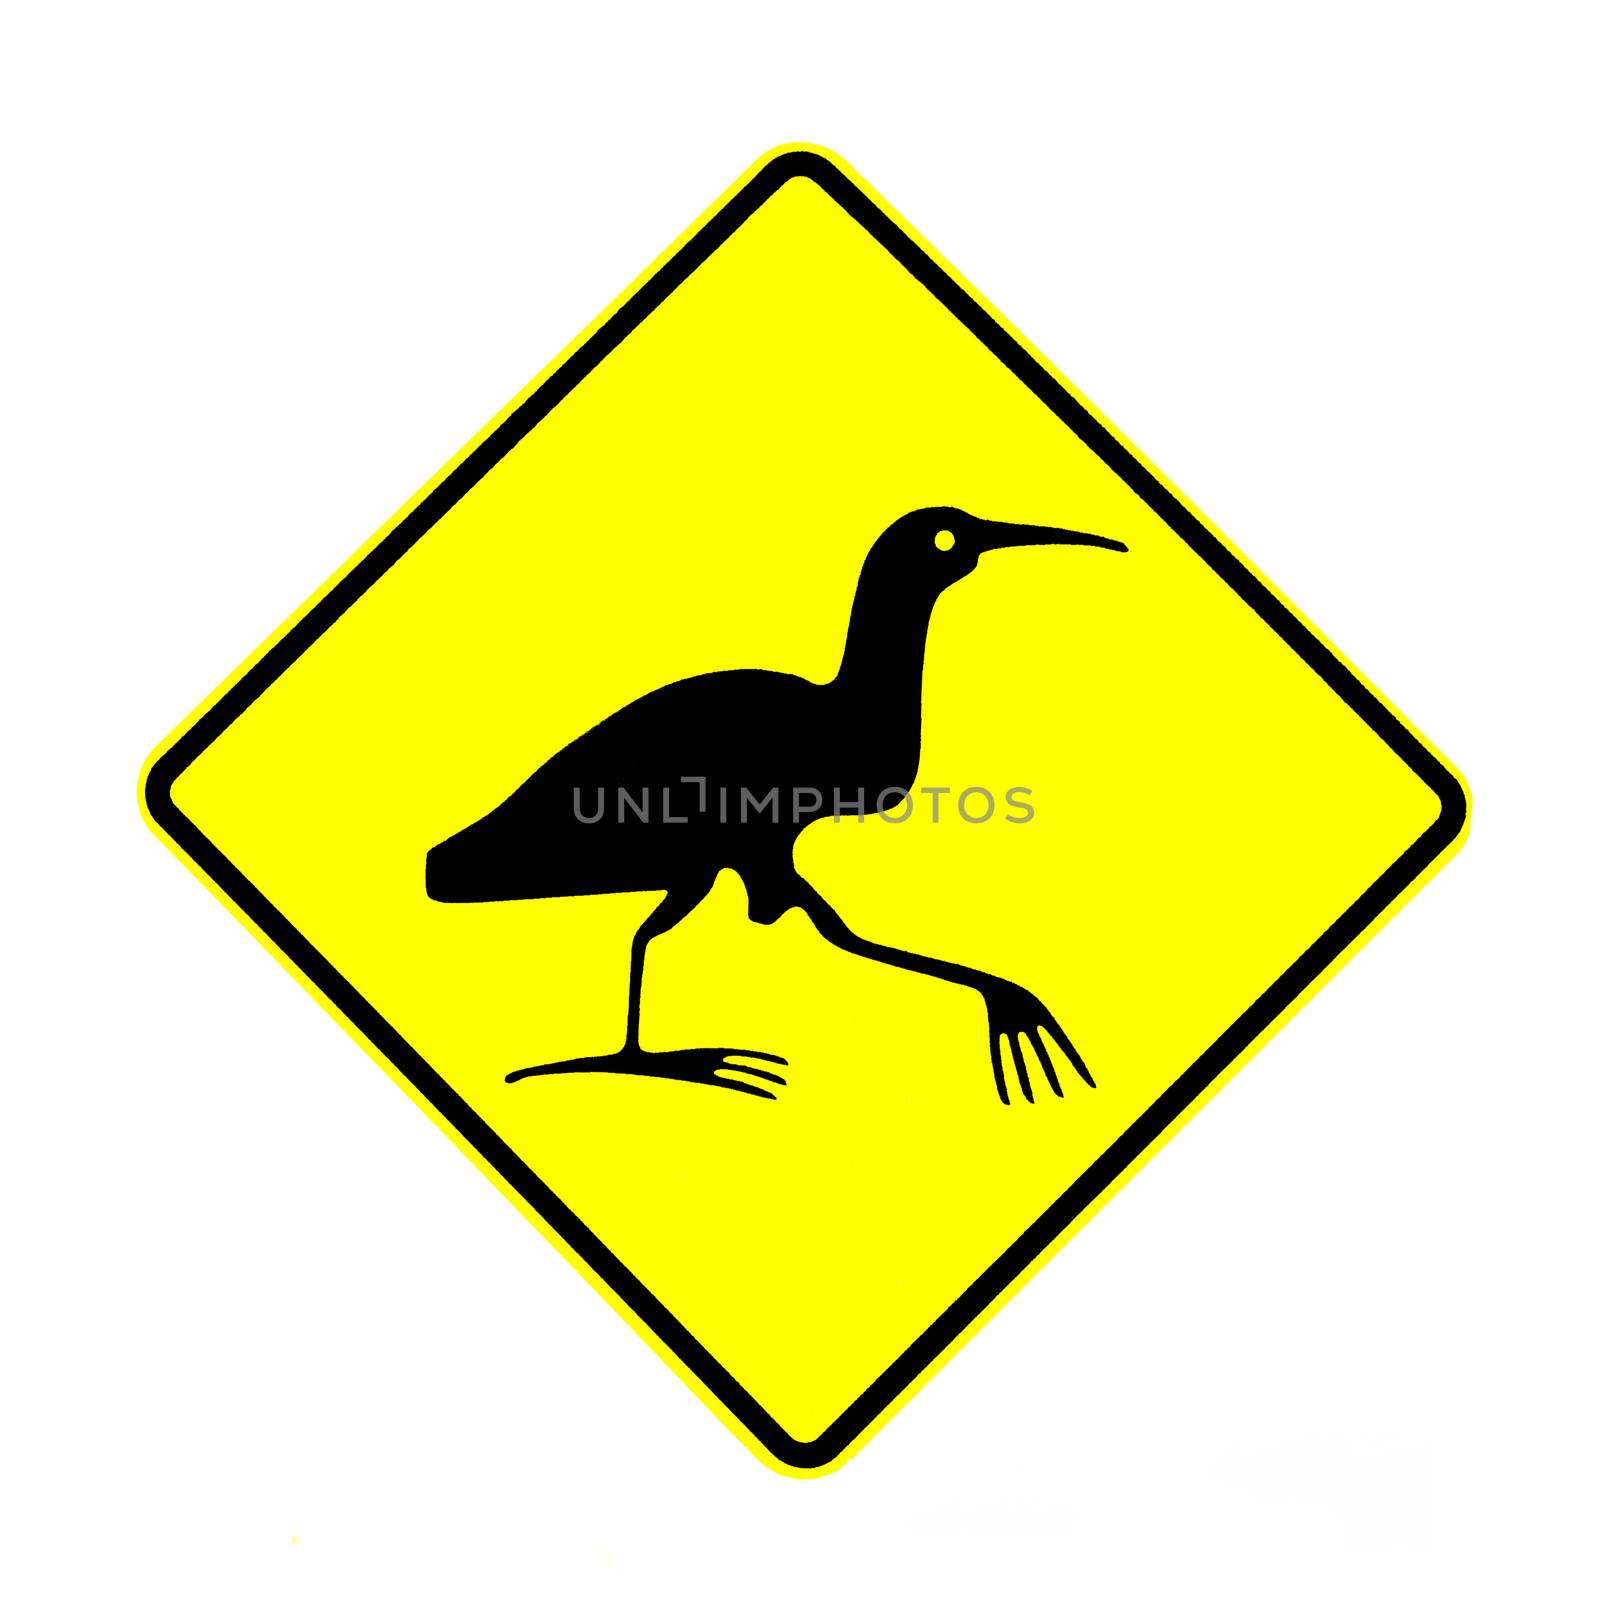 NZ Attention Bittern Crossing Road Sign on White by PiLens